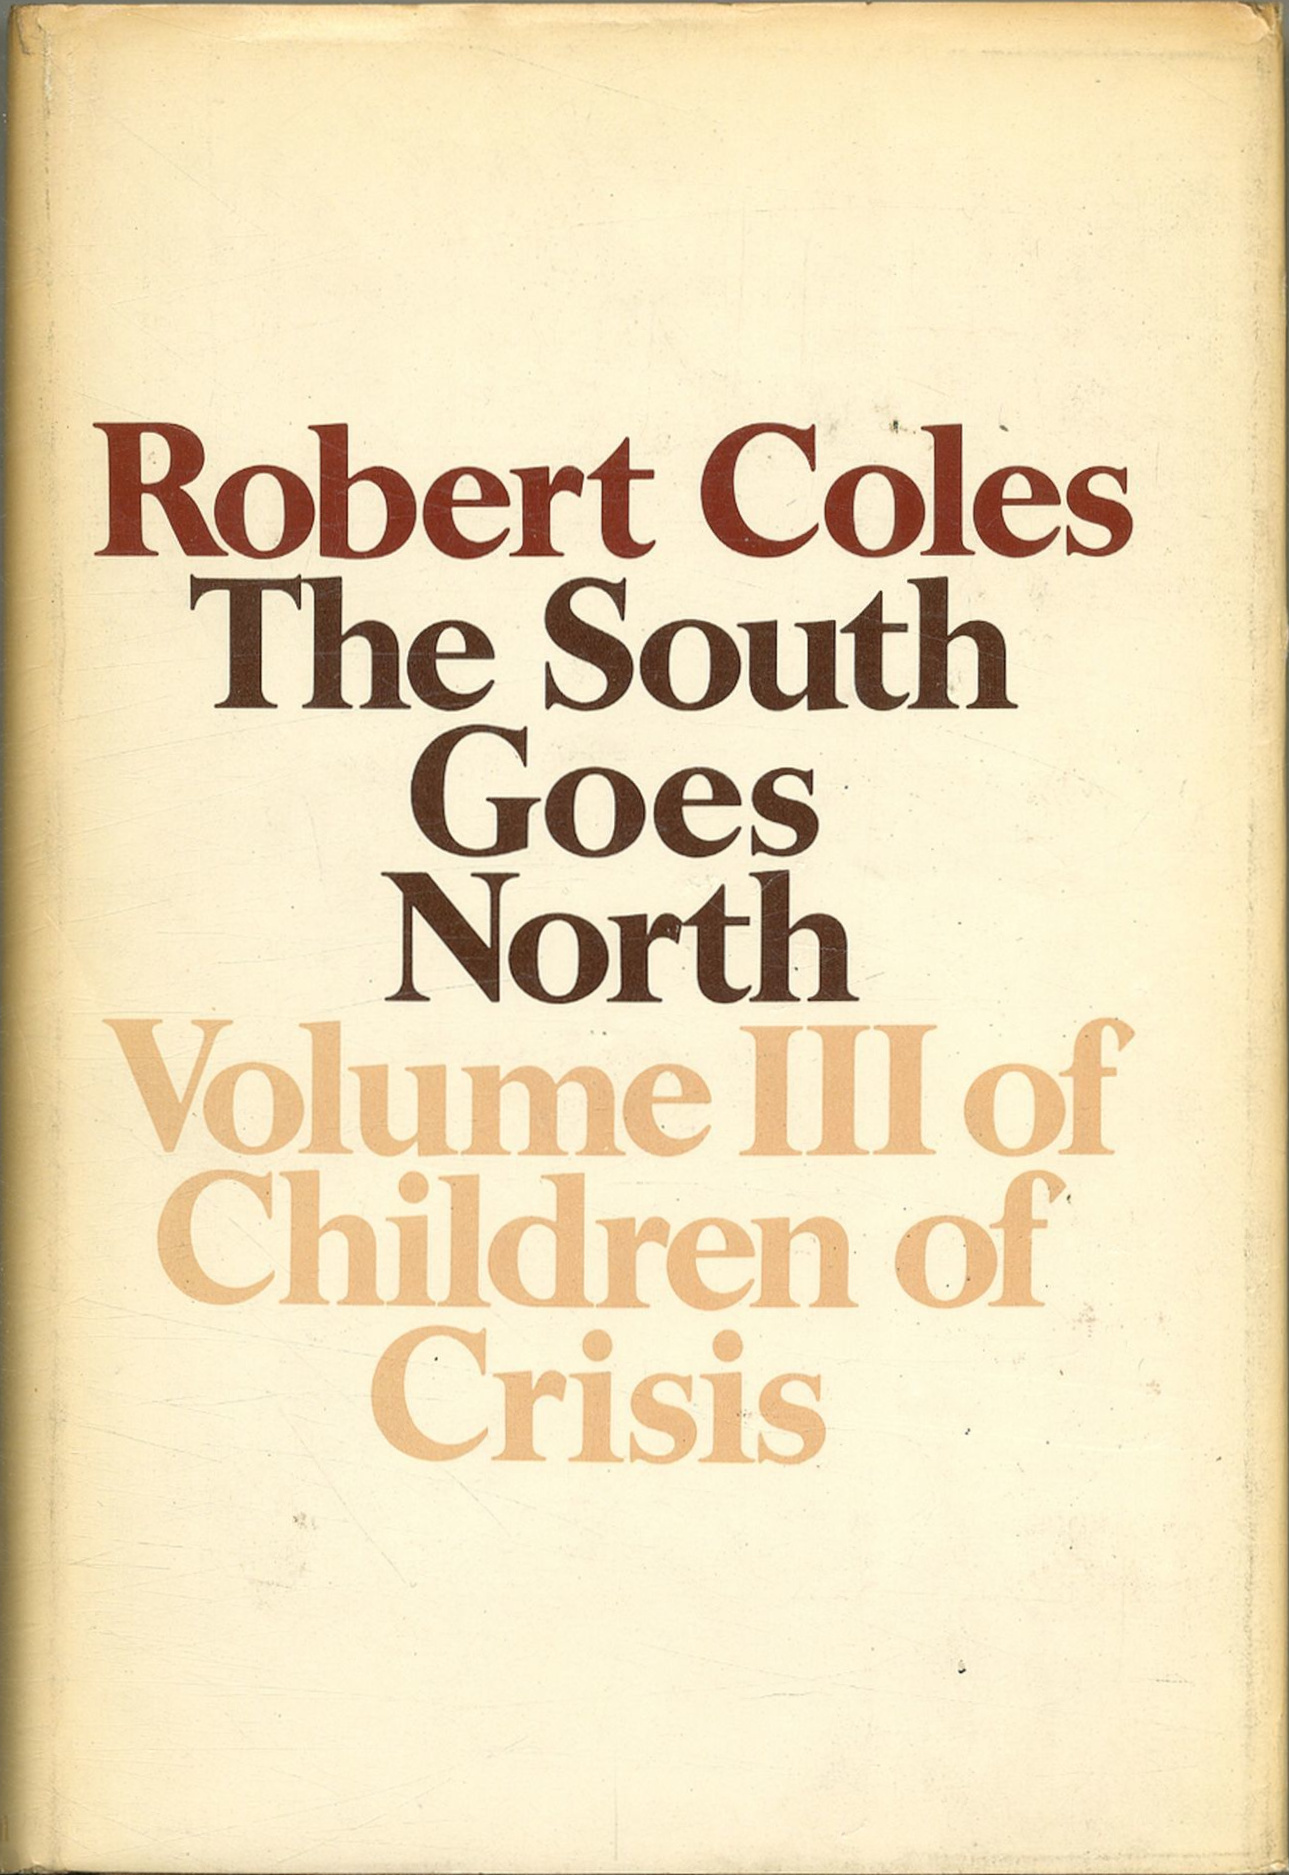 Robert Coles: The South Goes North (Hardcover, 1971, Atlantic Monthly Press)